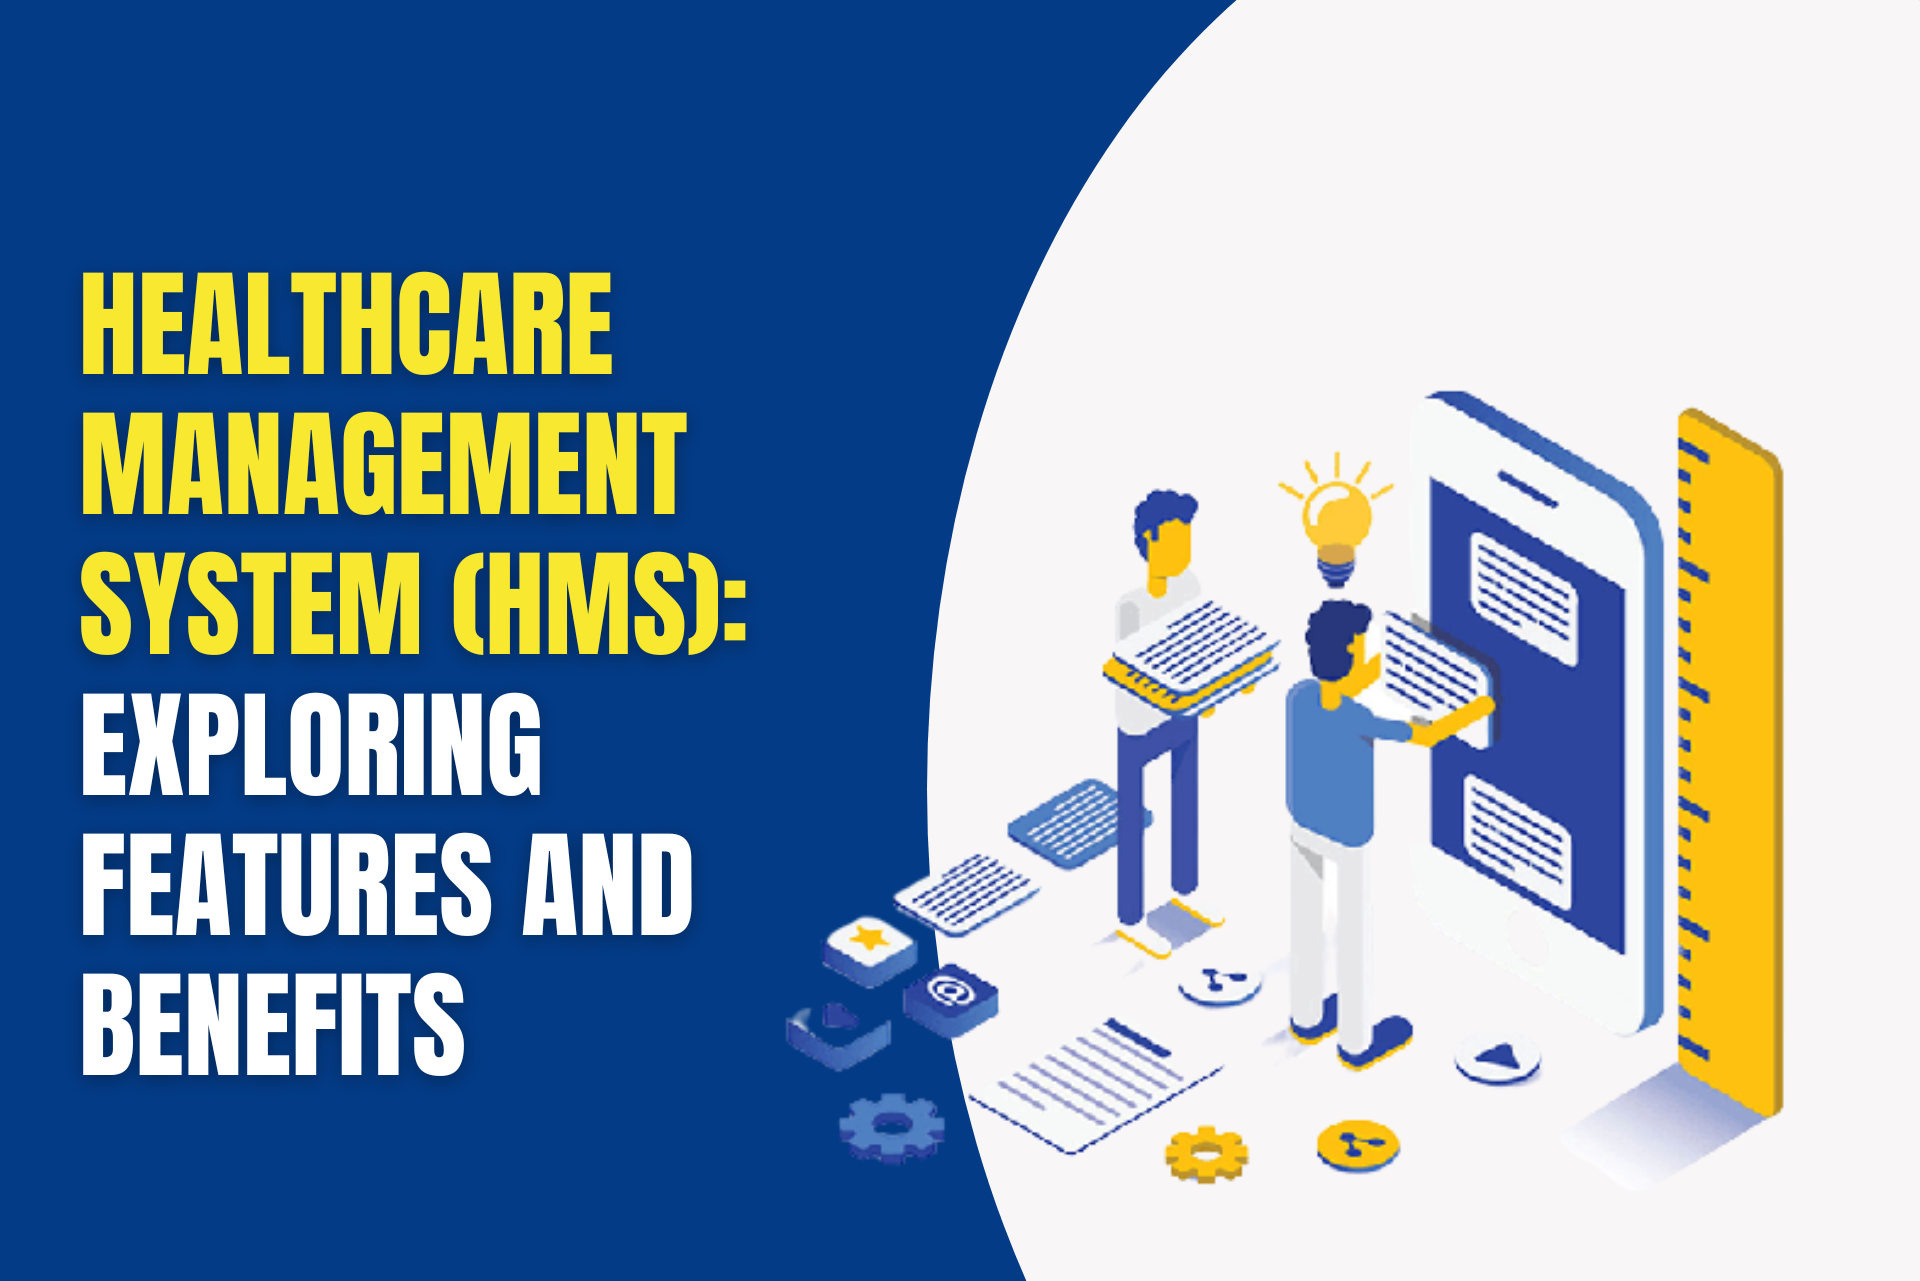 Healthcare Management System (HMS): Exploring Features and Benefits